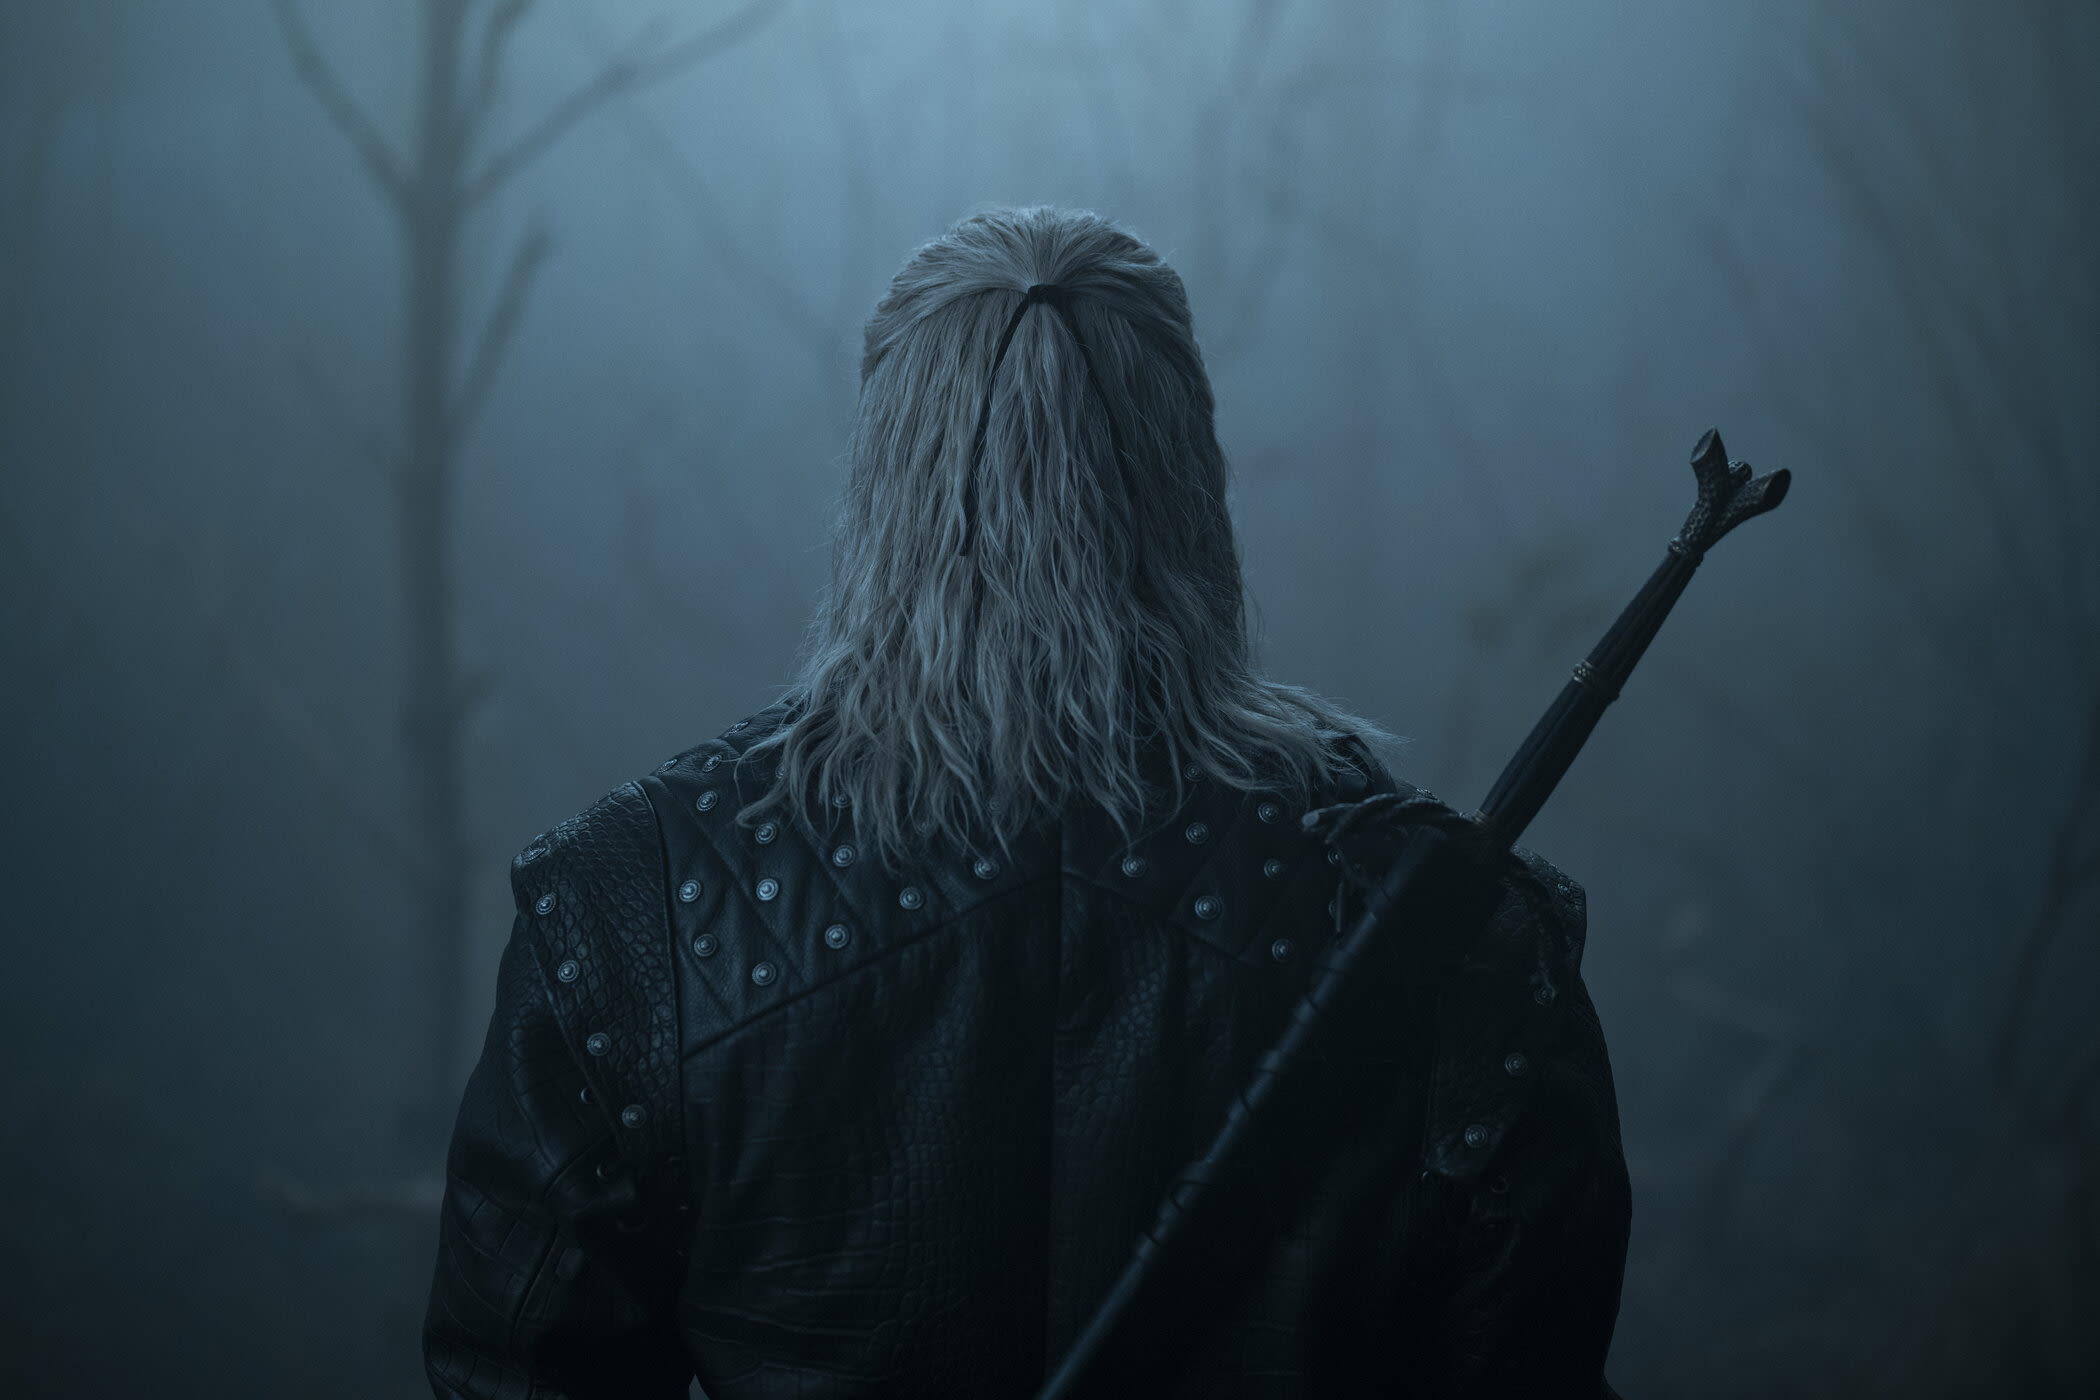 Netflix gave Witcher fans a different lead actor, when all they wanted was new writers